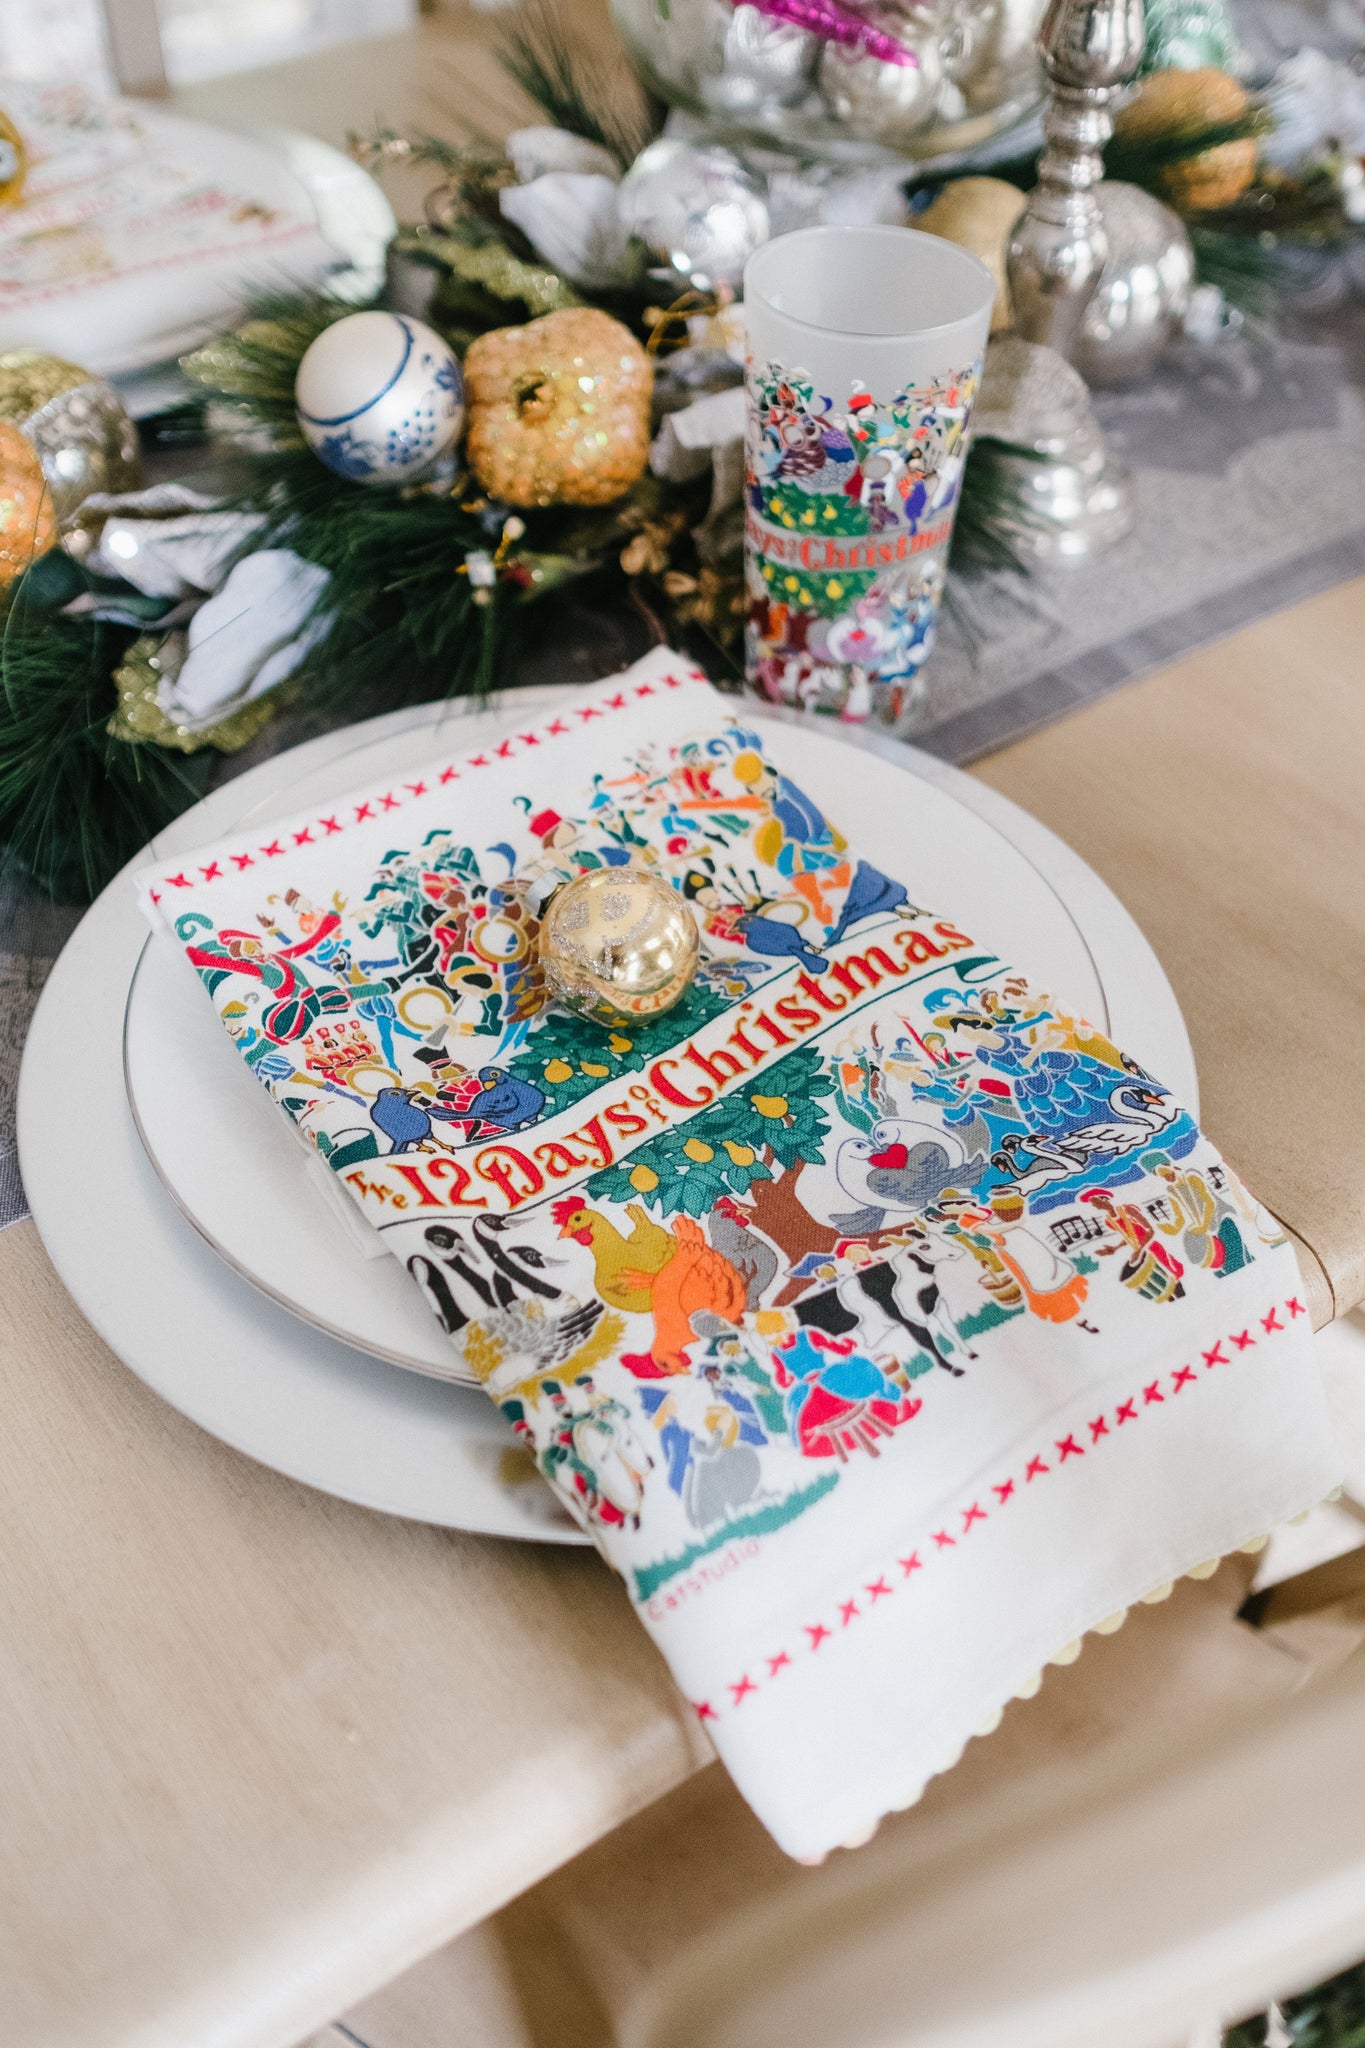 12 Days of Christmas Dish Towel  Holiday Collection by catstudio –  catstudio